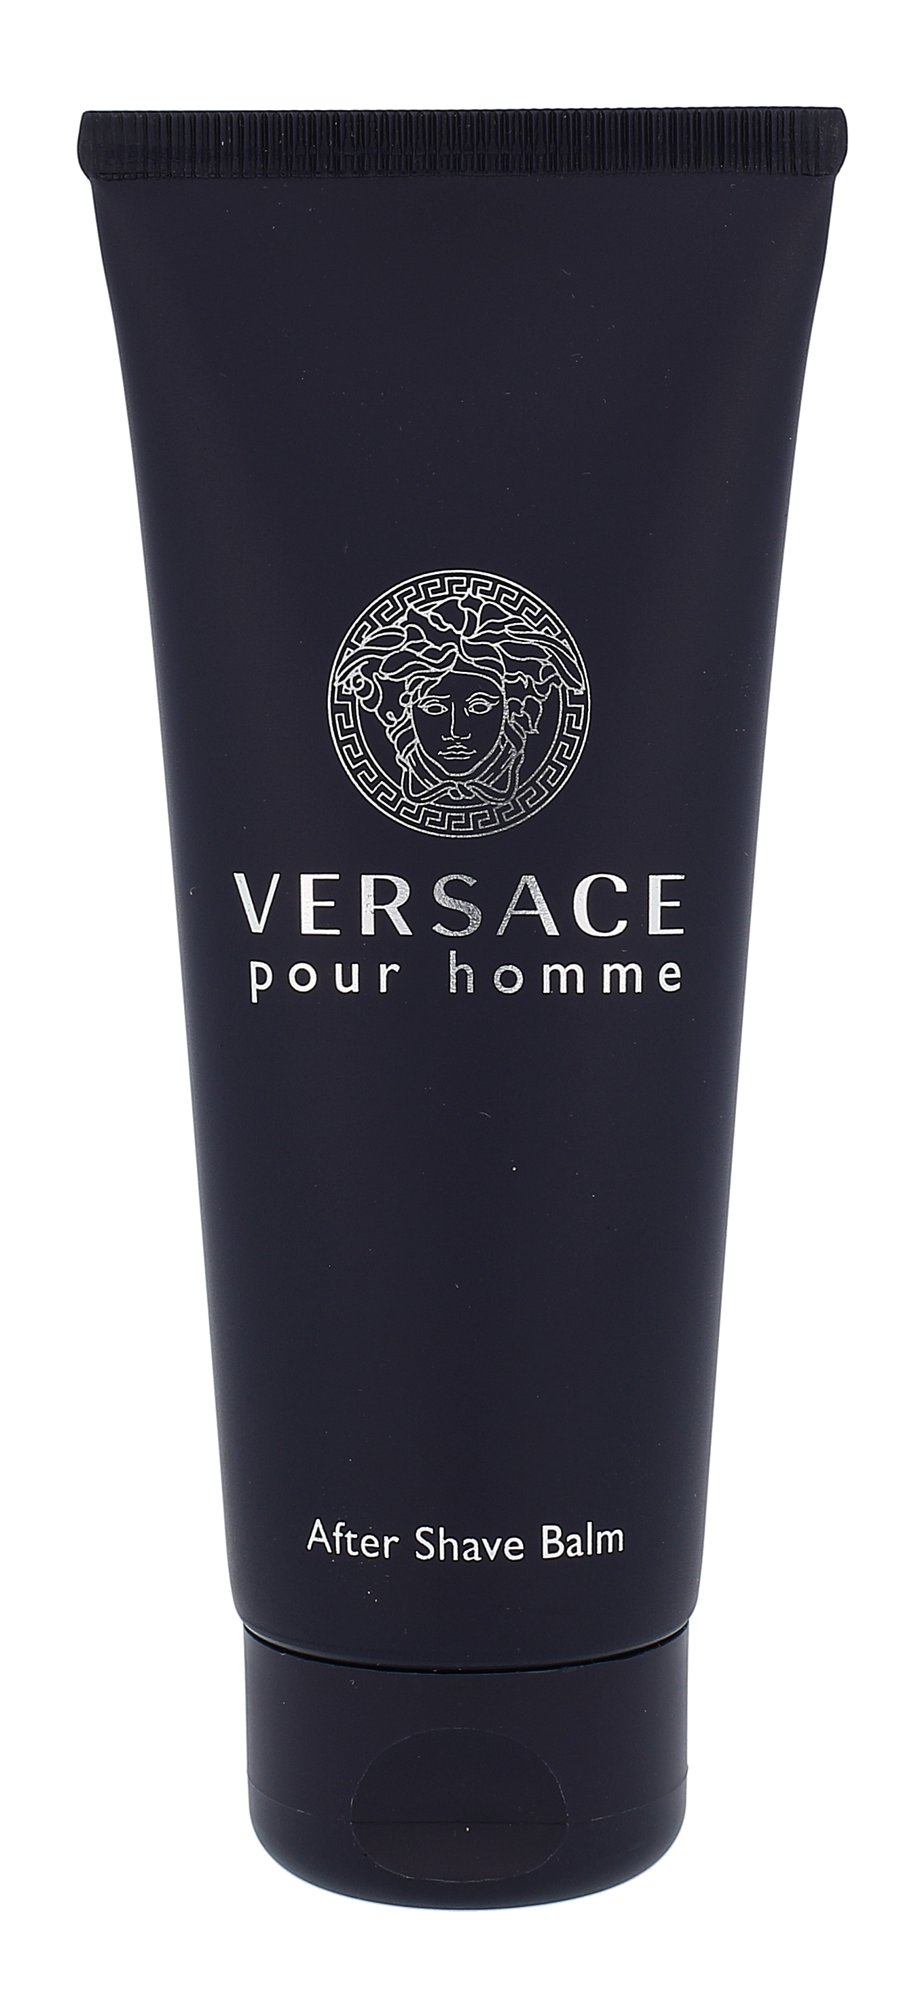 Versace Pour Homme, After shave balm 100ml